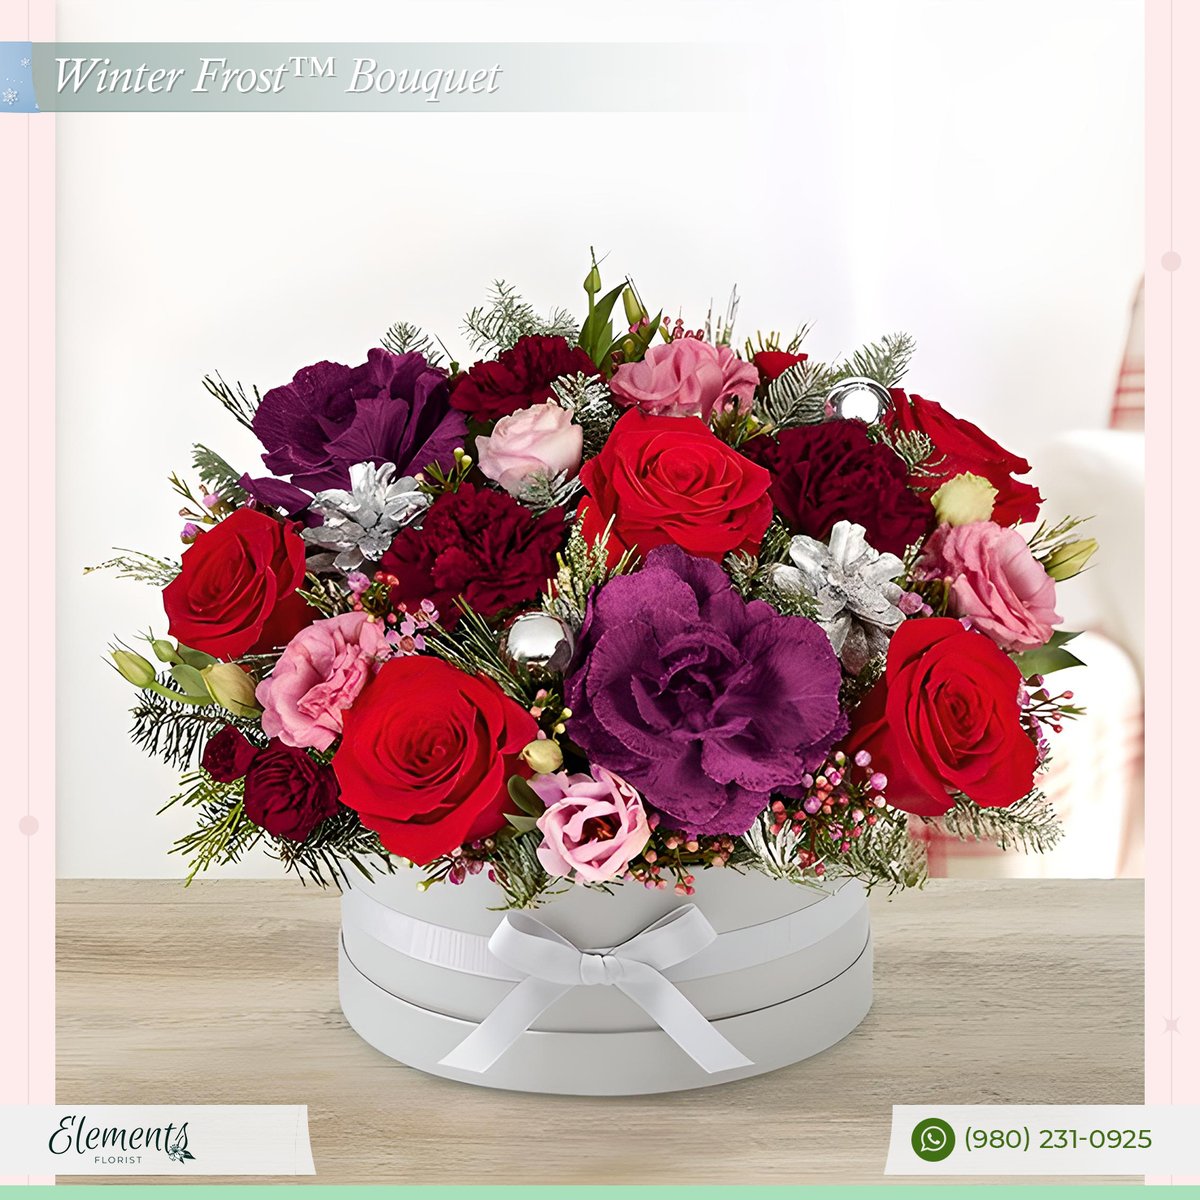 Bring warmth and color to winter with our elegant bouquet. A gathering of blooms in red, purple, pink and burgundy is arranged with lush greenery and silver frosted pinecones.  ❄️
.
#flowerart #flowermagic #justbefloral #floraldesign